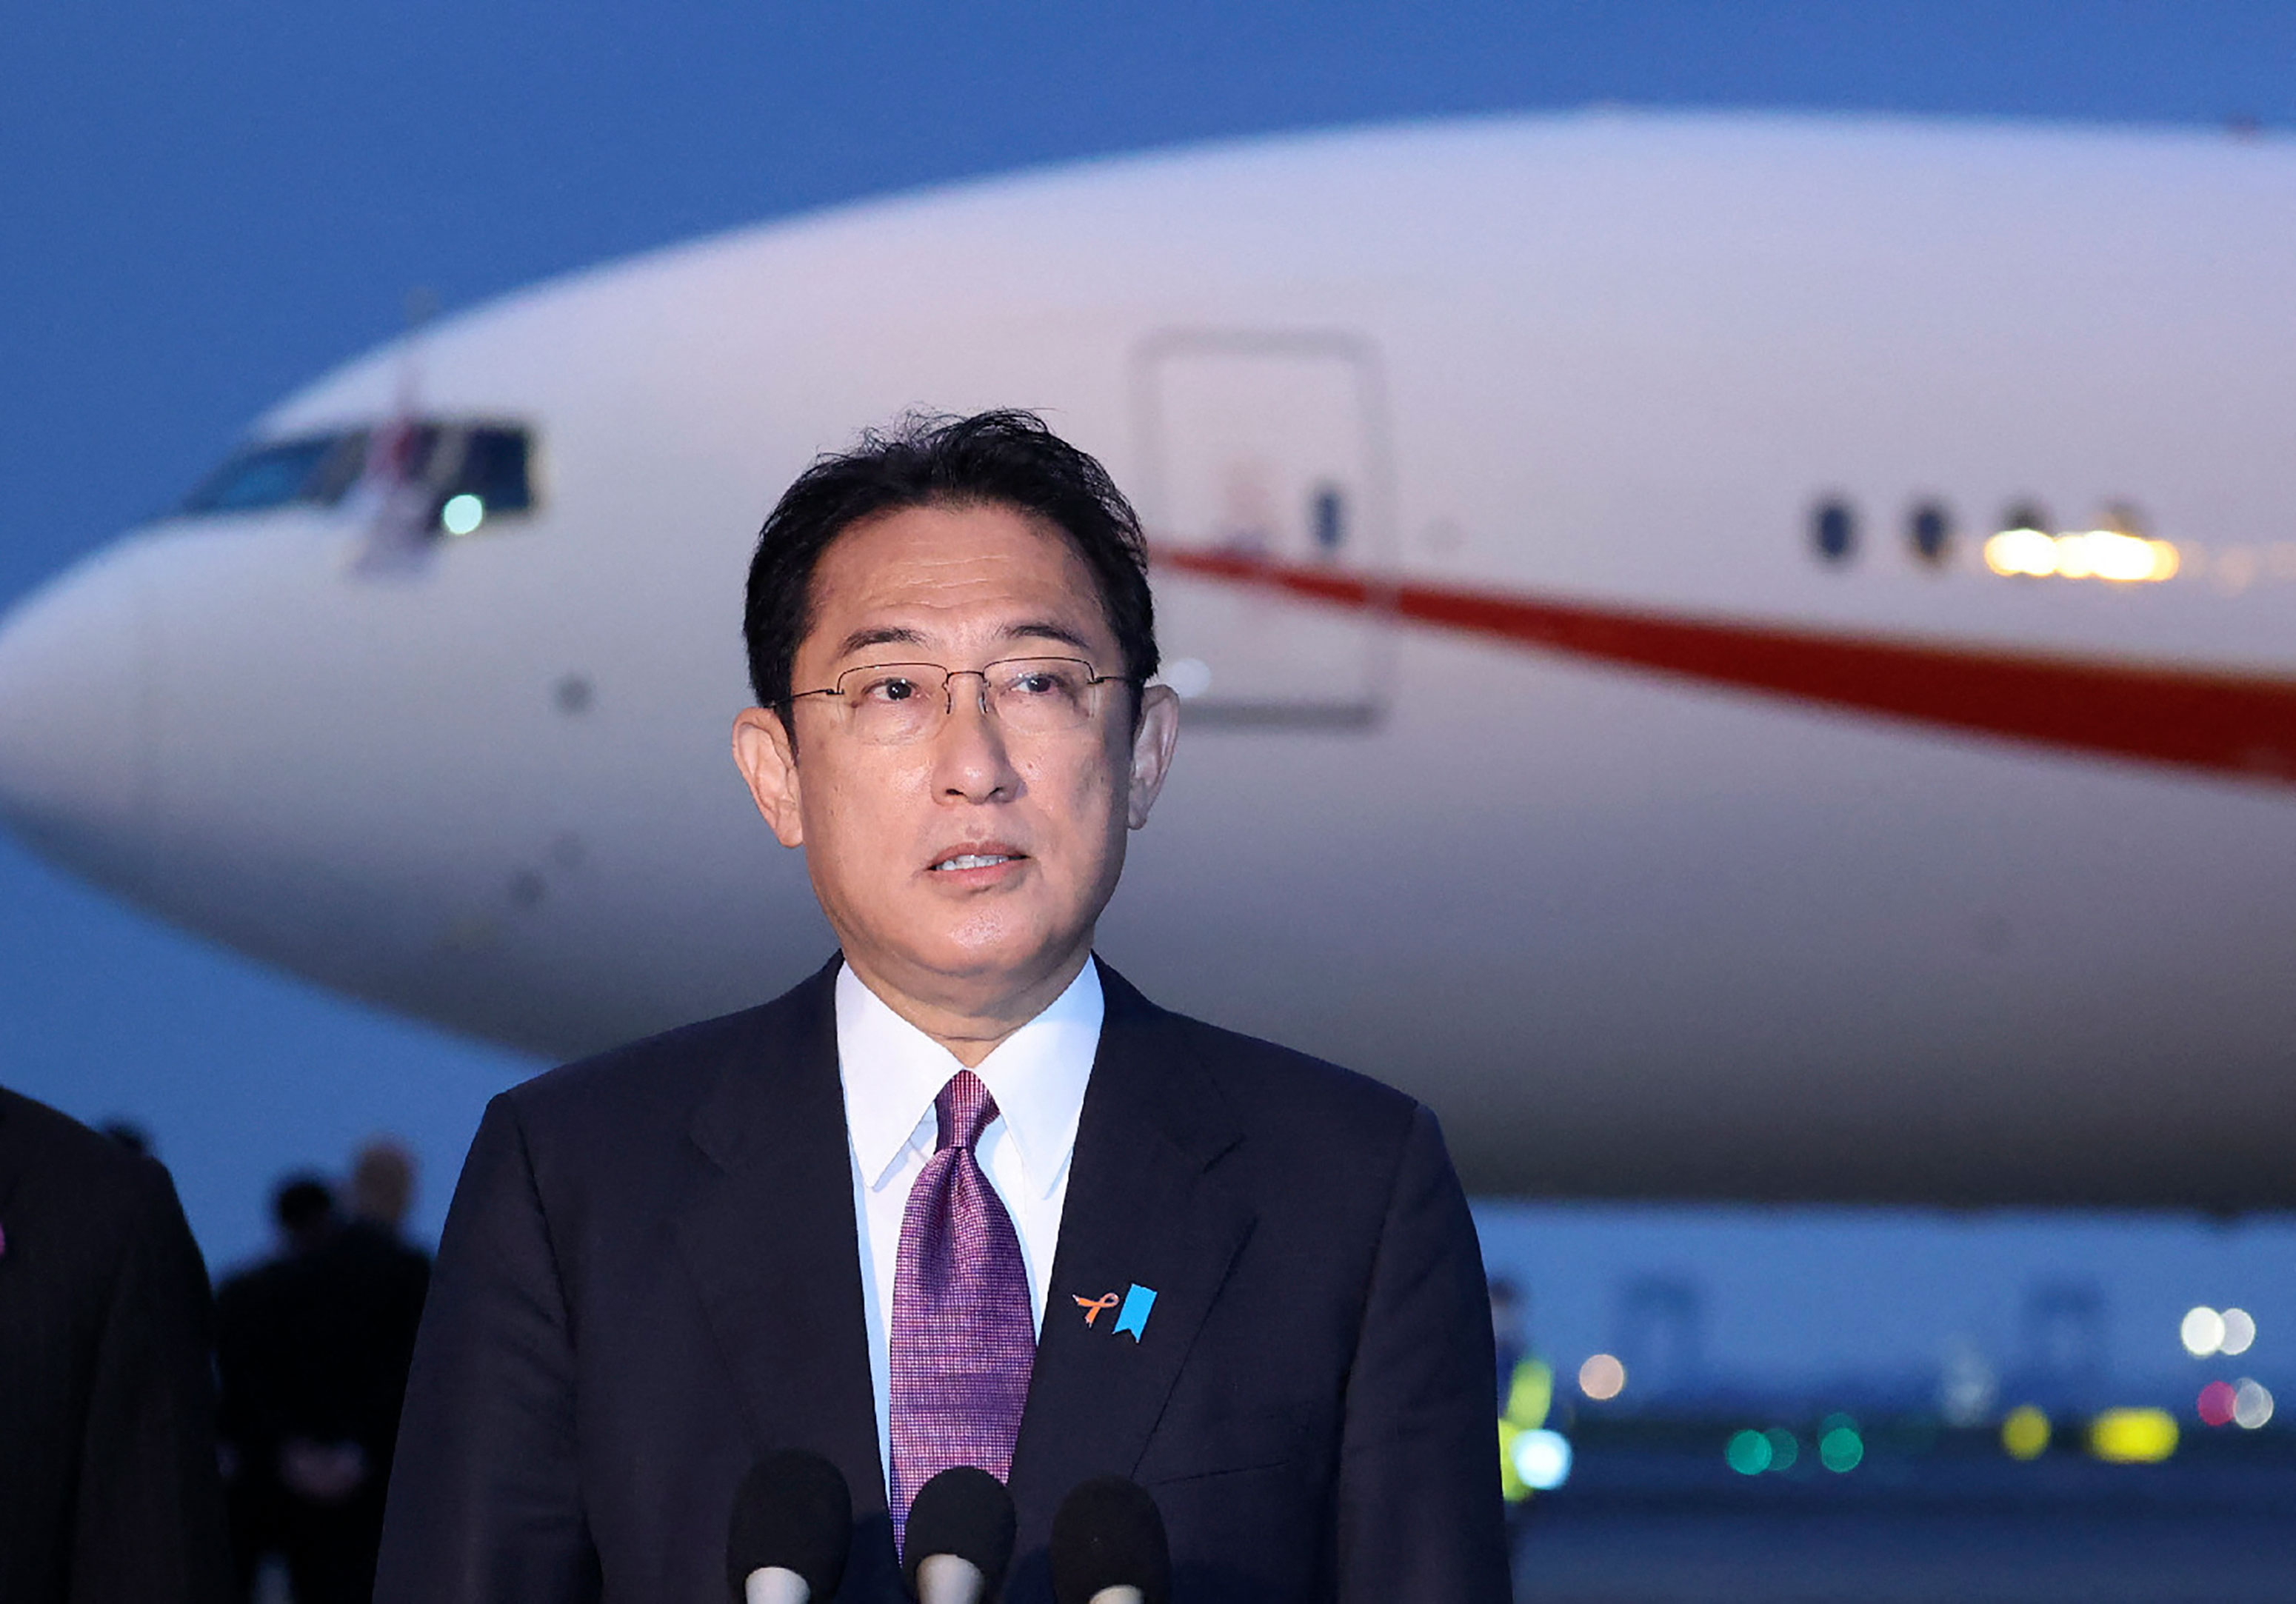 Japan's Prime Minister Fumio Kishida speaks to reporters at Tokyo's Haneda Airport on November 2, before traveling to the UK to attend COP26.